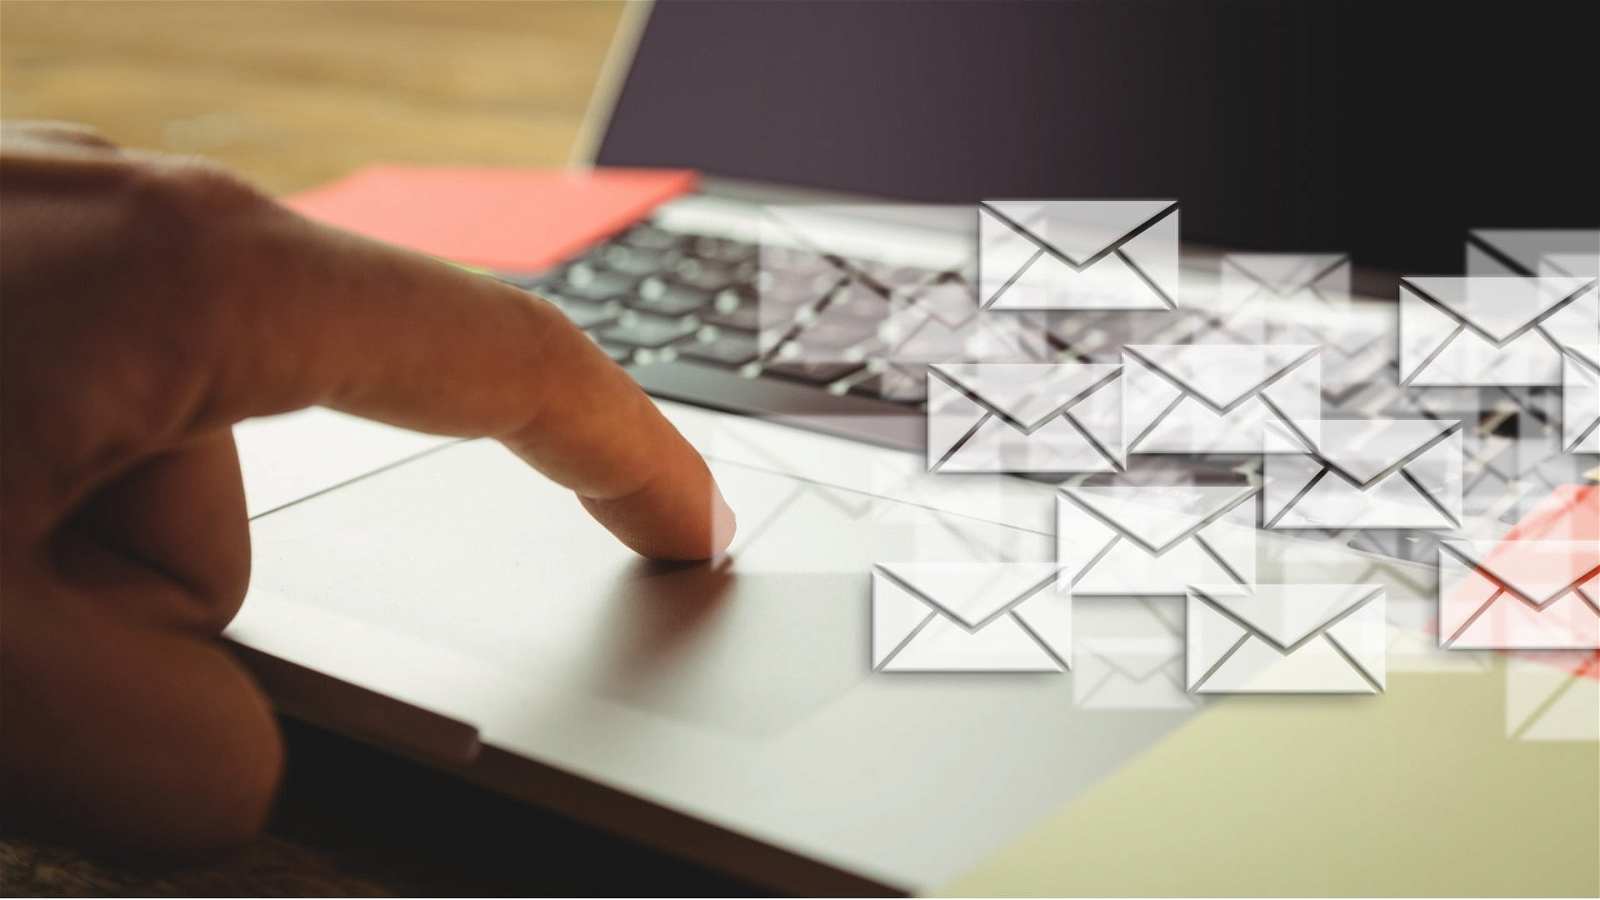 Find email addresses with these growth hacking tools